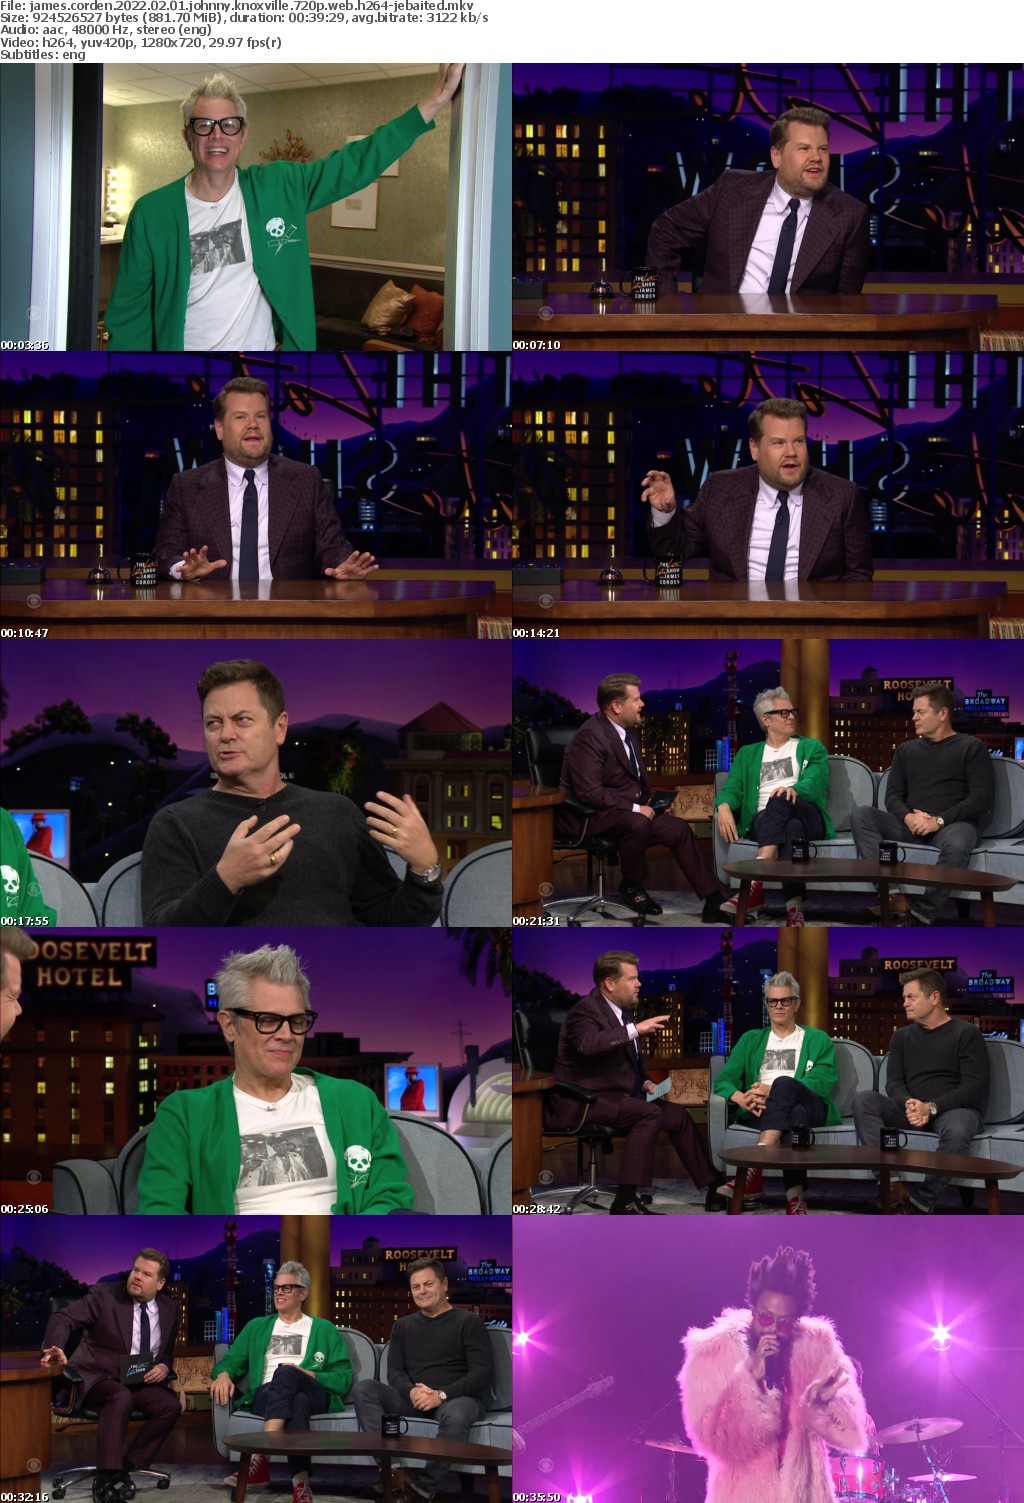 James Corden 2022 02 01 Johnny Knoxville 720p WEB H264-JEBAITED